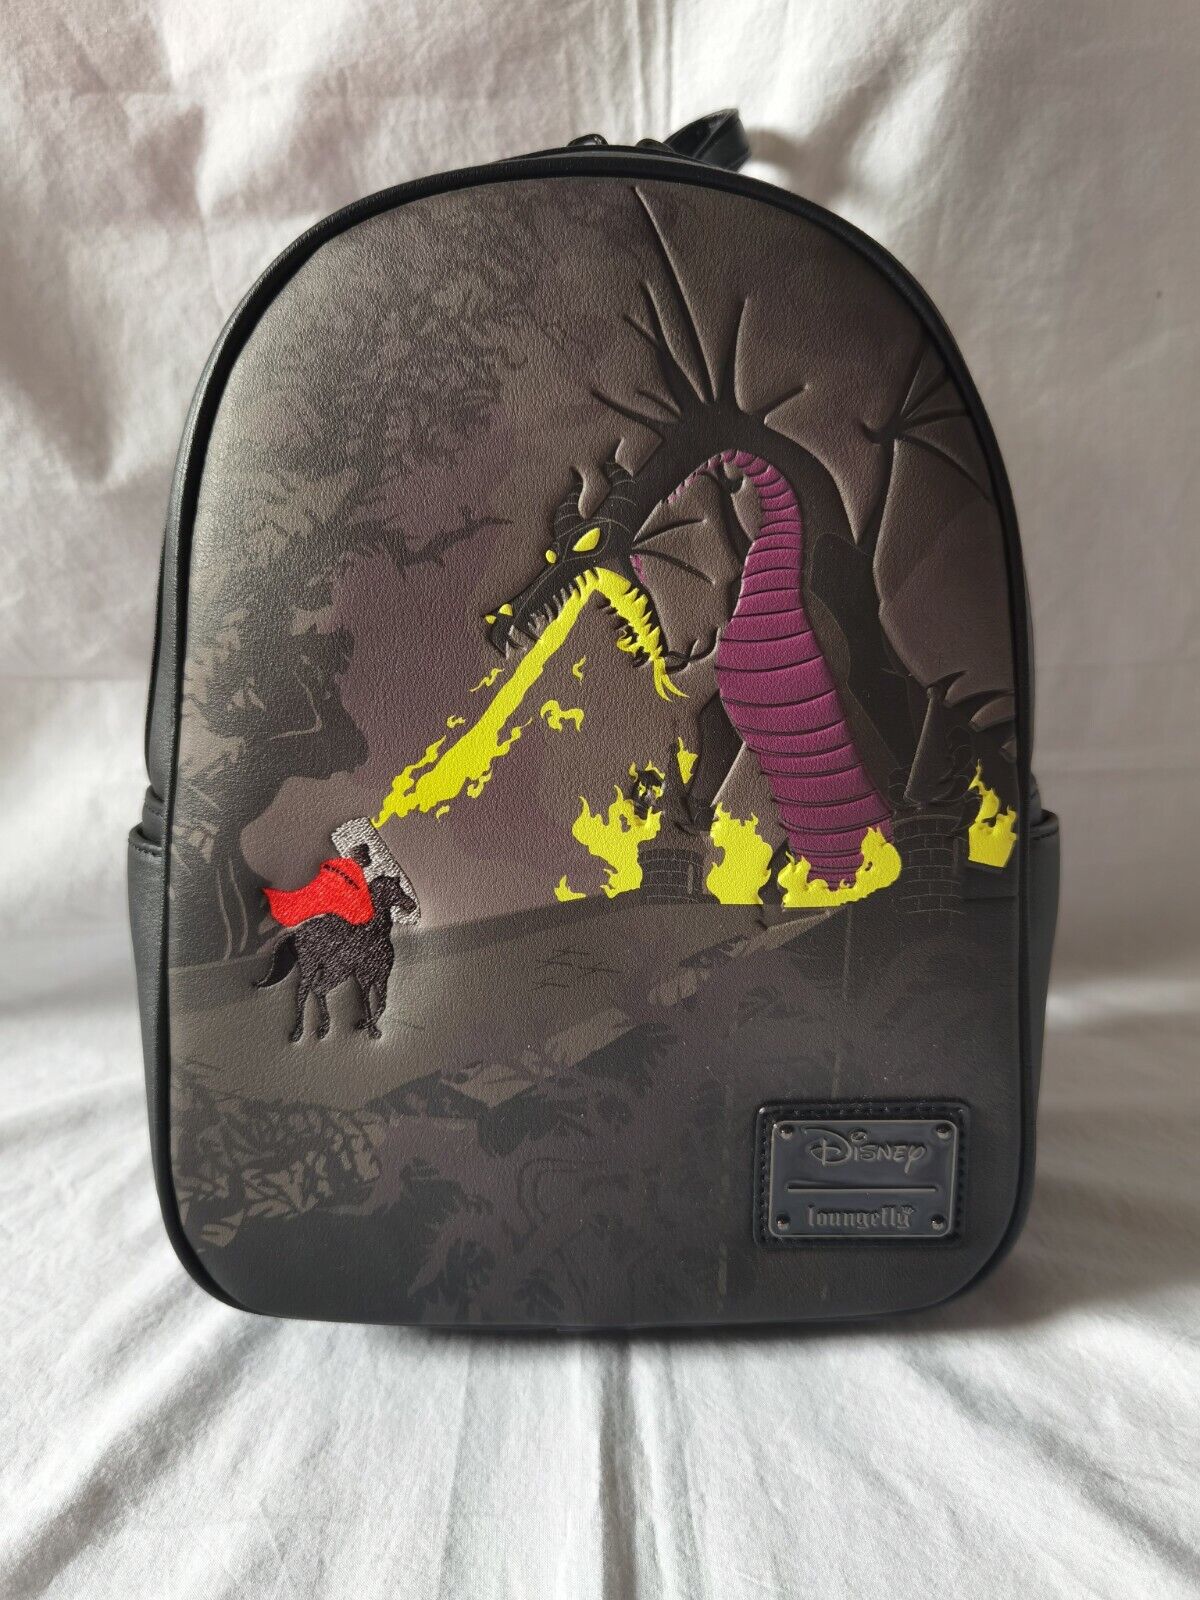 Loungefly Disney Maleficent Dragon Mini Backpack Black Brand New with Tags